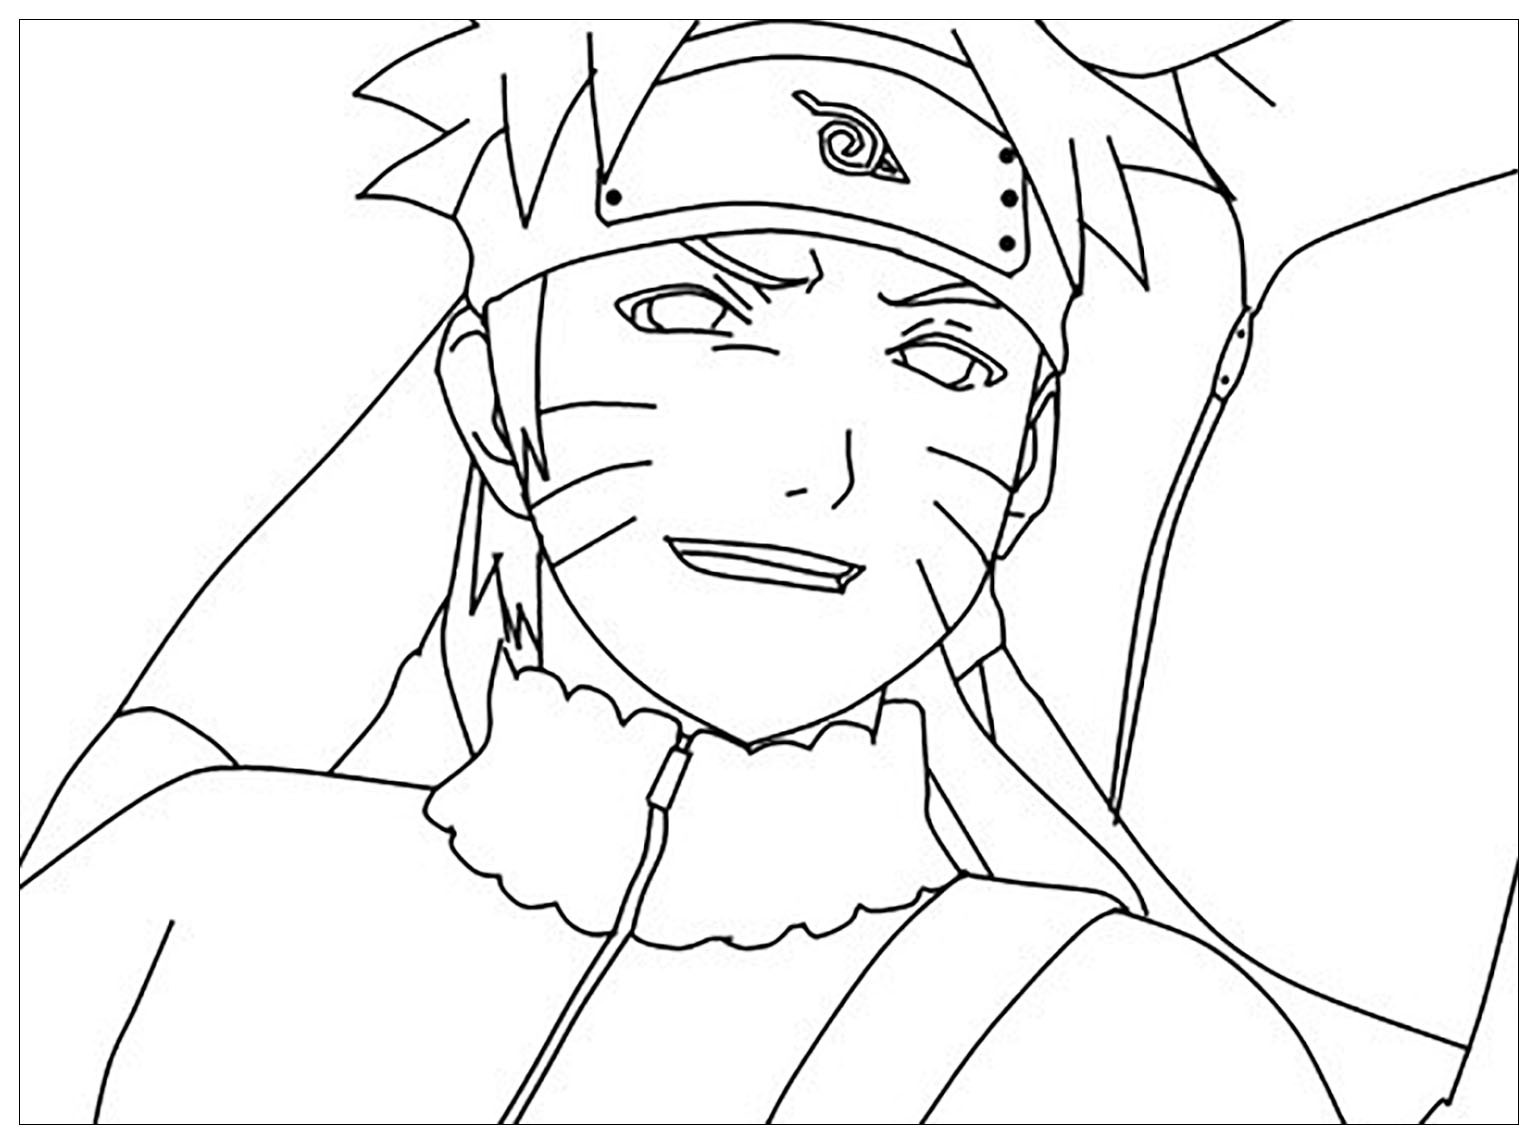 Naruto souriant - Naruto Kids Coloring Pages